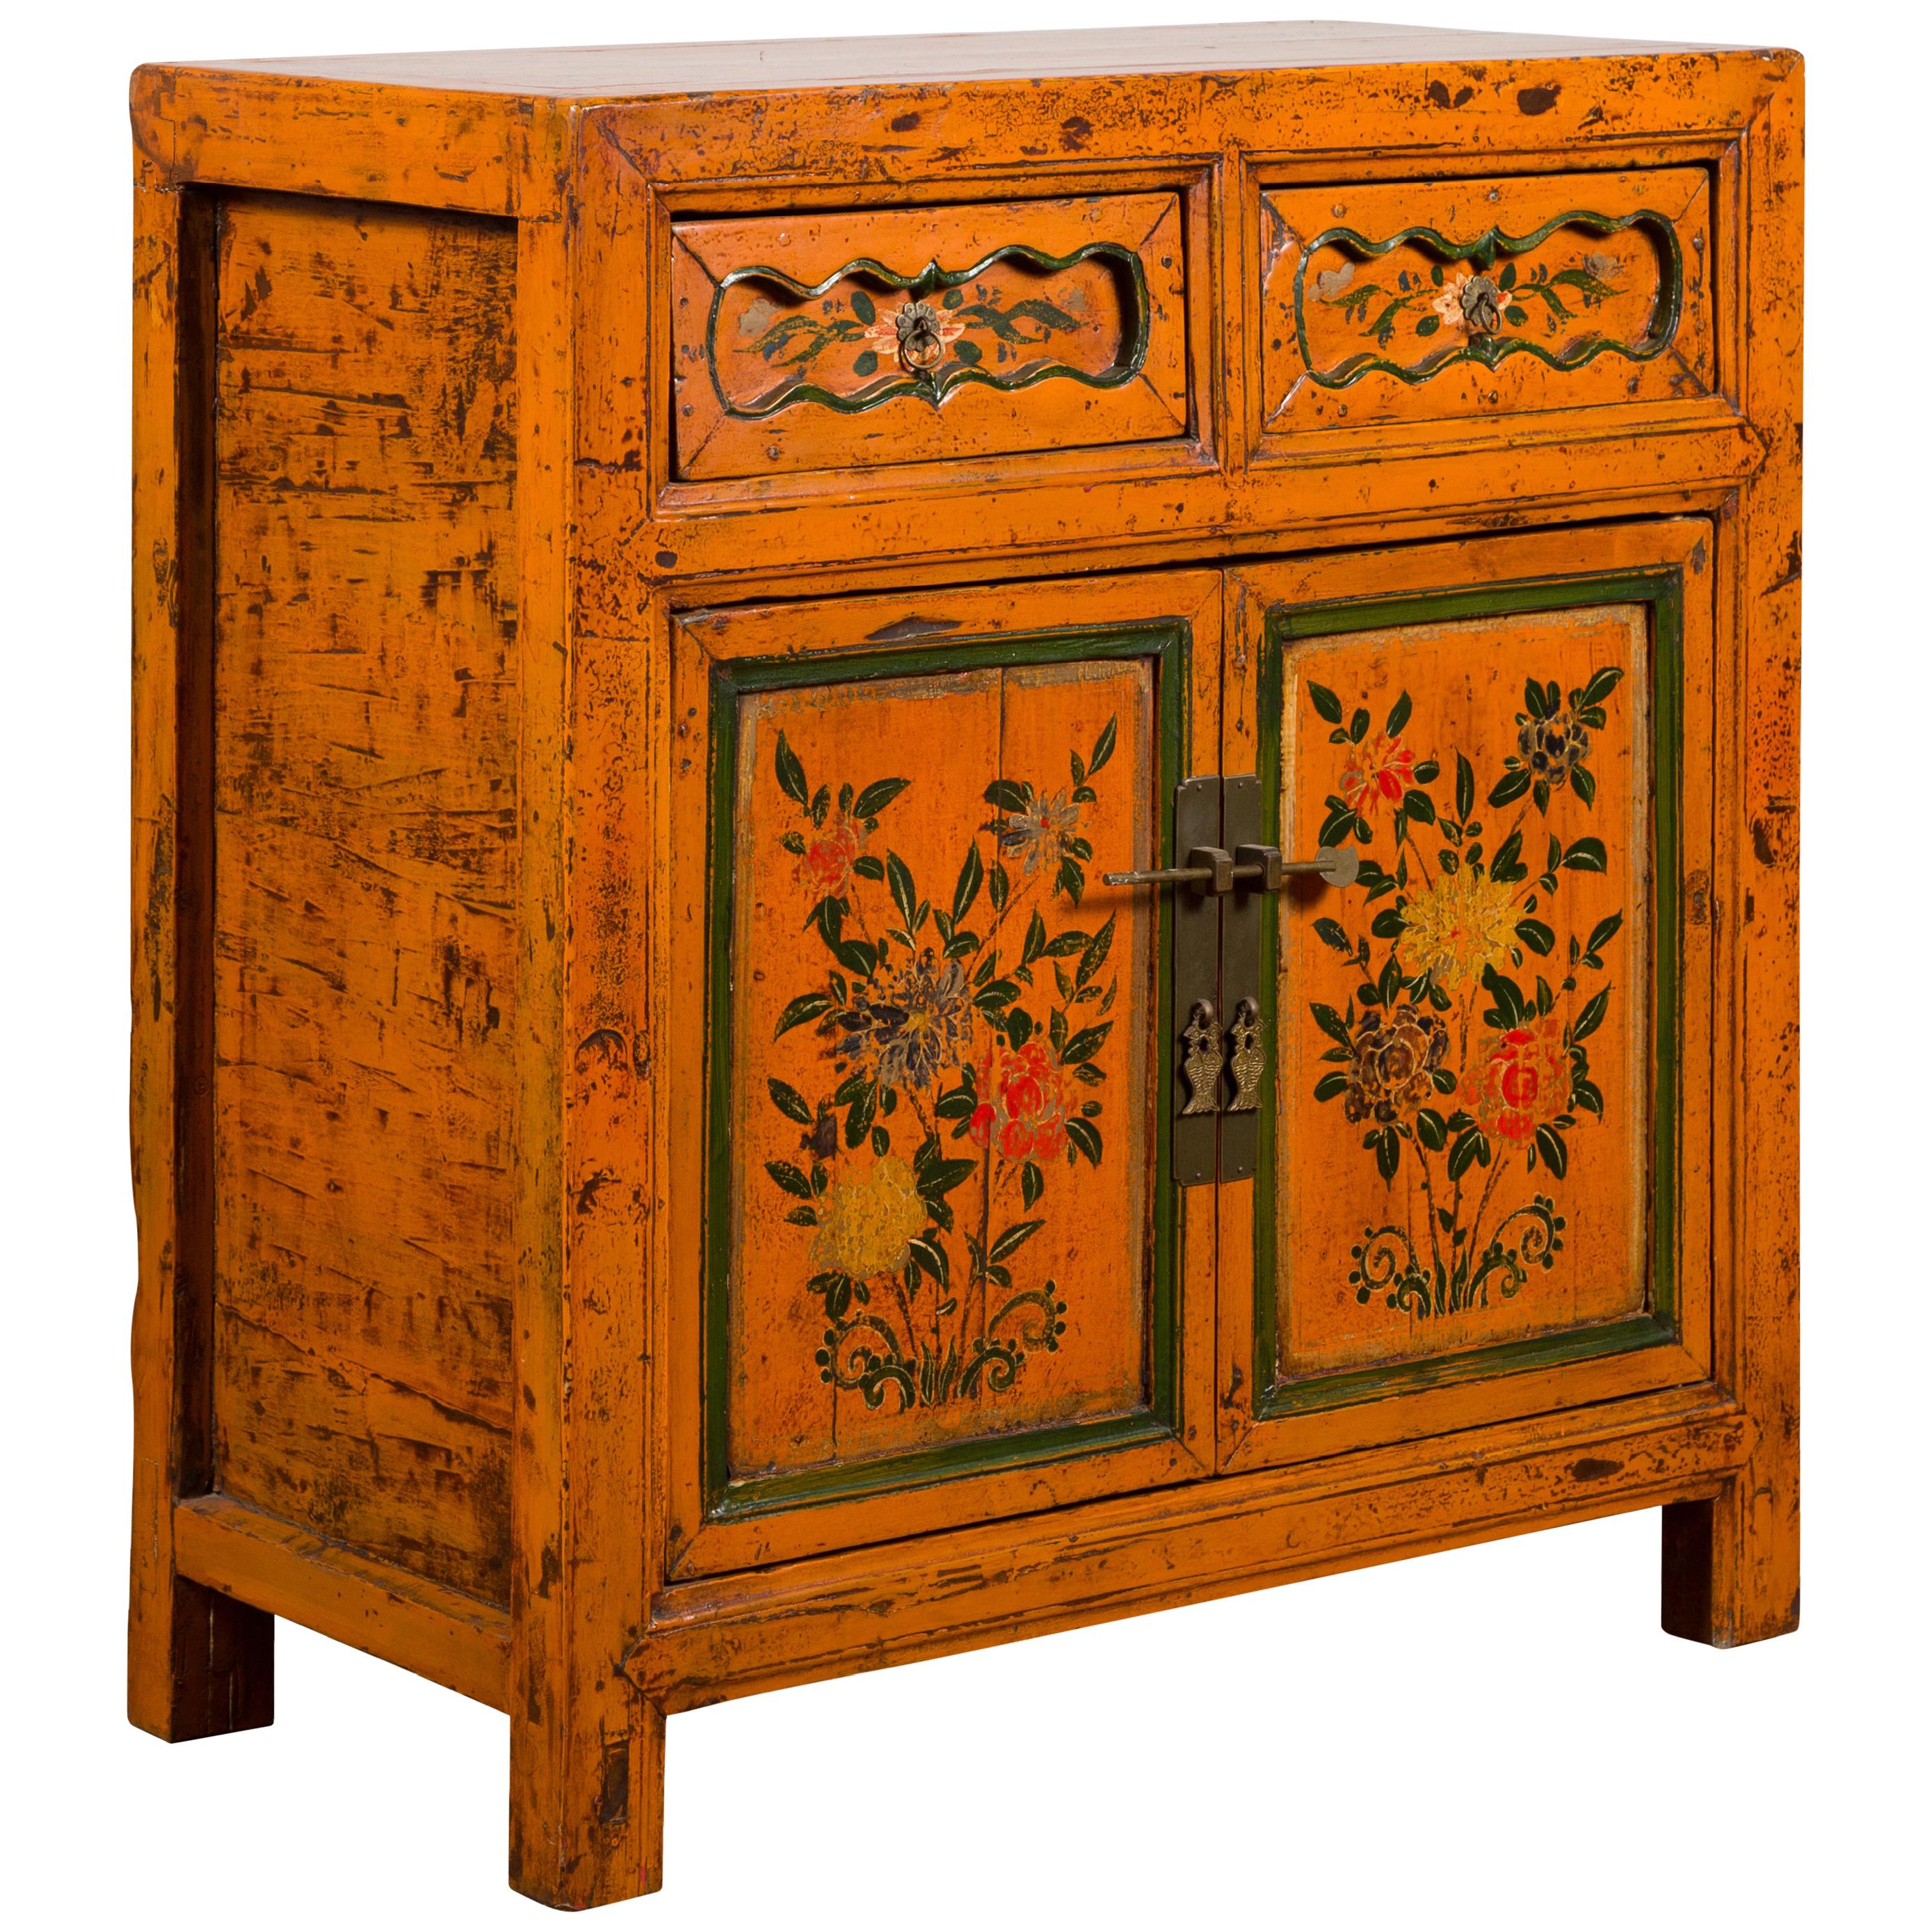 Chinese Qing Dynasty Period Tibetan Style Gansu Cabinet with Hand-Painted Decor